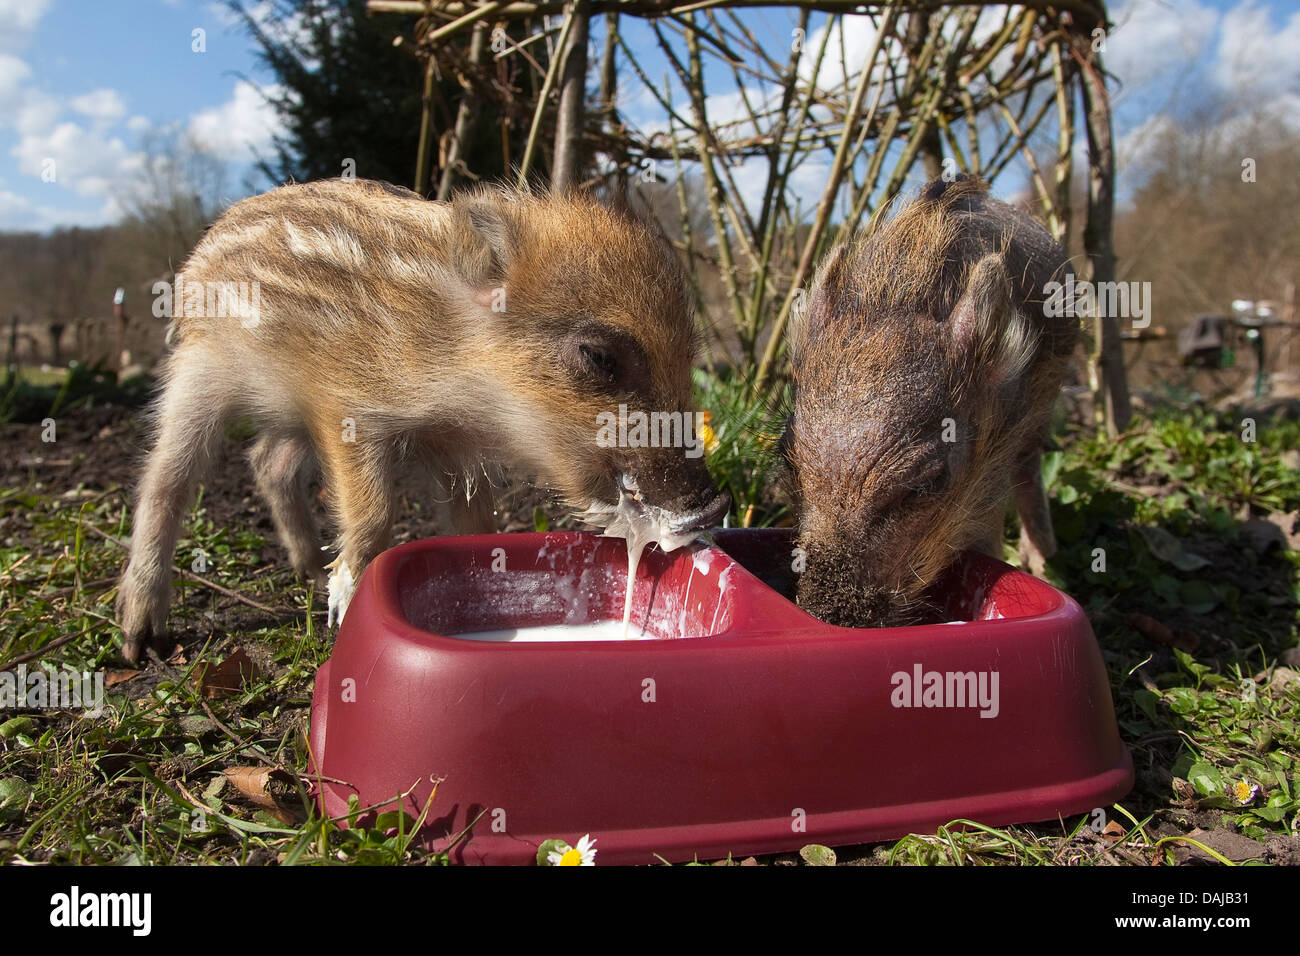 wild boar, pig, wild boar (Sus scrofa), two shotes feeding out of a feeding dish in the garden, Germany Stock Photo